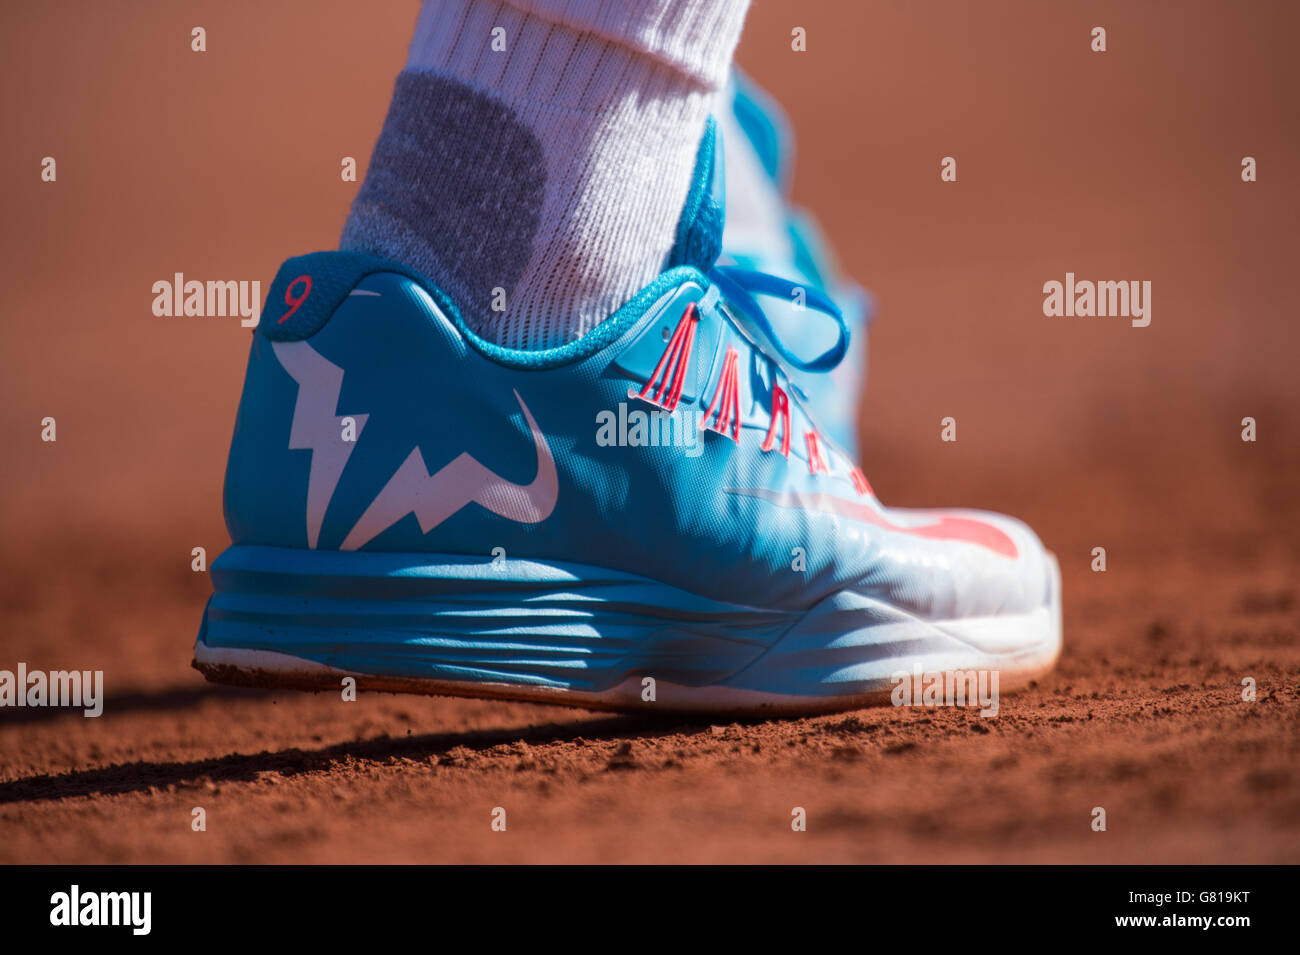 Rafael Nadal wears customised Nike tennis shoes during early morning  practice on Philippe Chatrier Court on day three of the French Open at  Roland Garros on May 26, 2015 in Paris, France